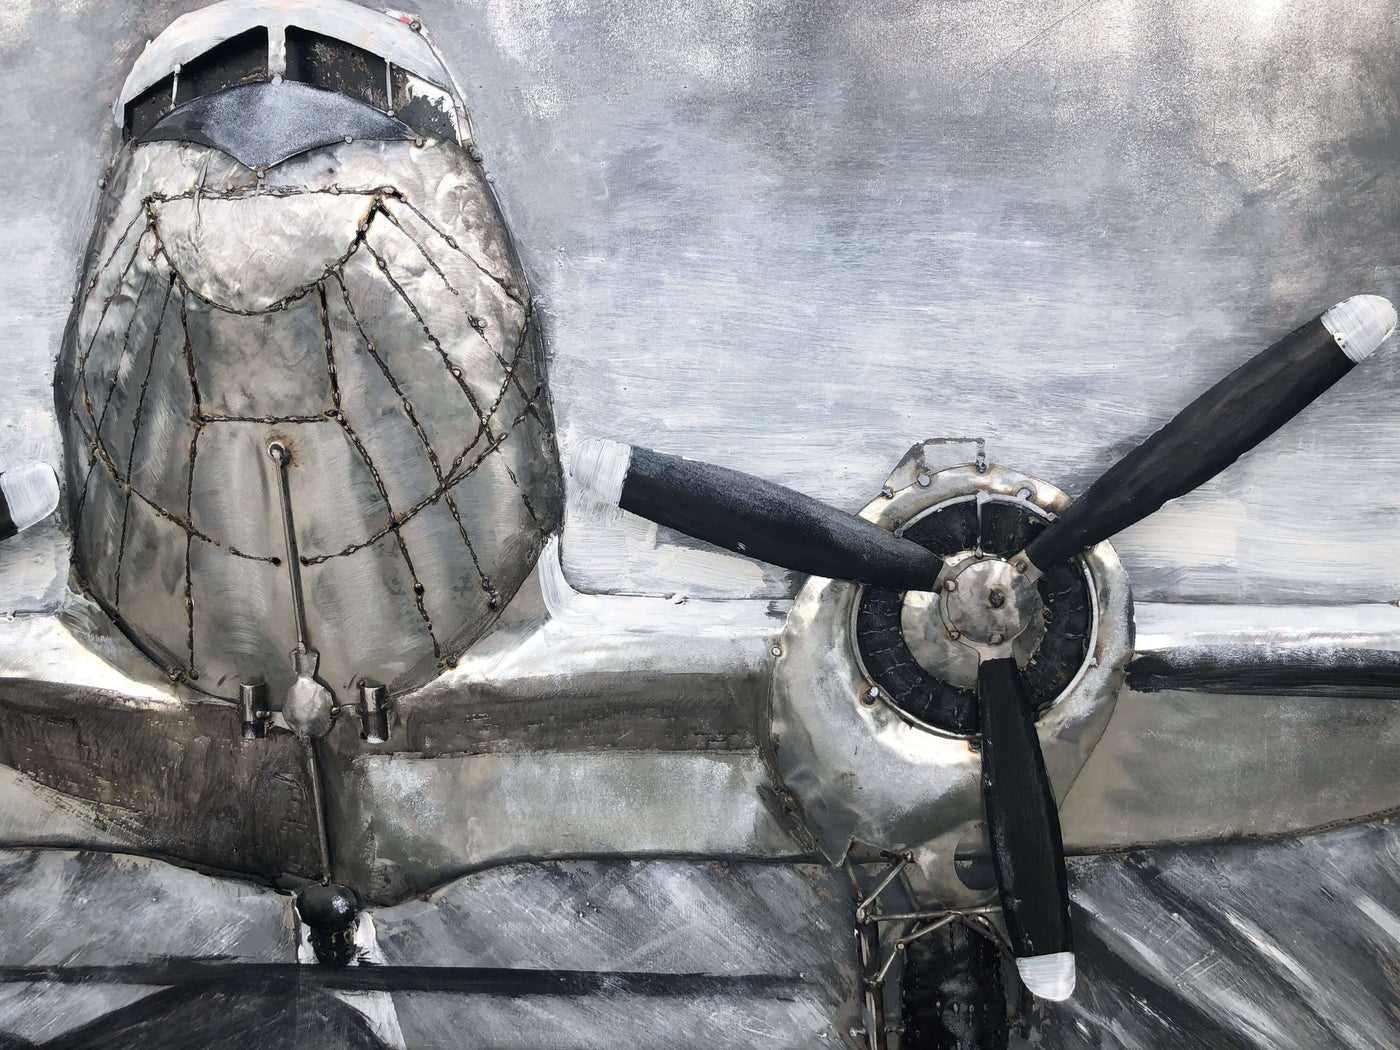 Douglas C-47 Skytrain 3D Metal Wall Art - WWII Transport Airliner in partnership with Rustic Deco Incorporated